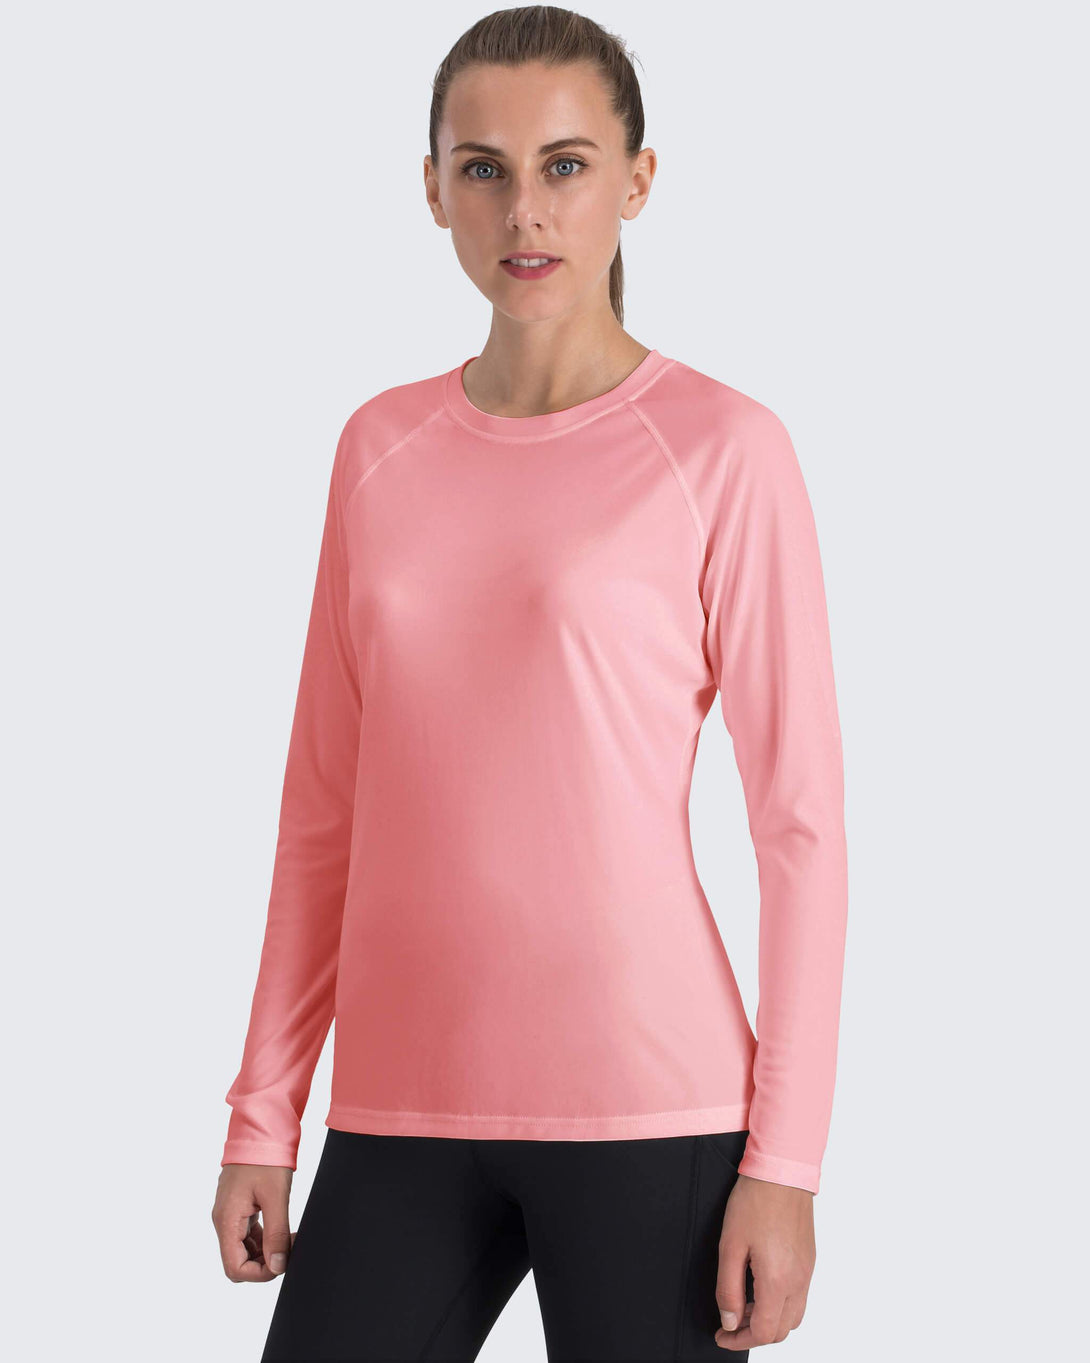  Womens Long Sleeve UPF 50+ Workout Tops Ladies Fishing Sun  Shirts Breathable Protection Shirt Lightweight Running Clothes Soft  Pullover Quick Dry T Shirt Athletic Tops Light Pink Large